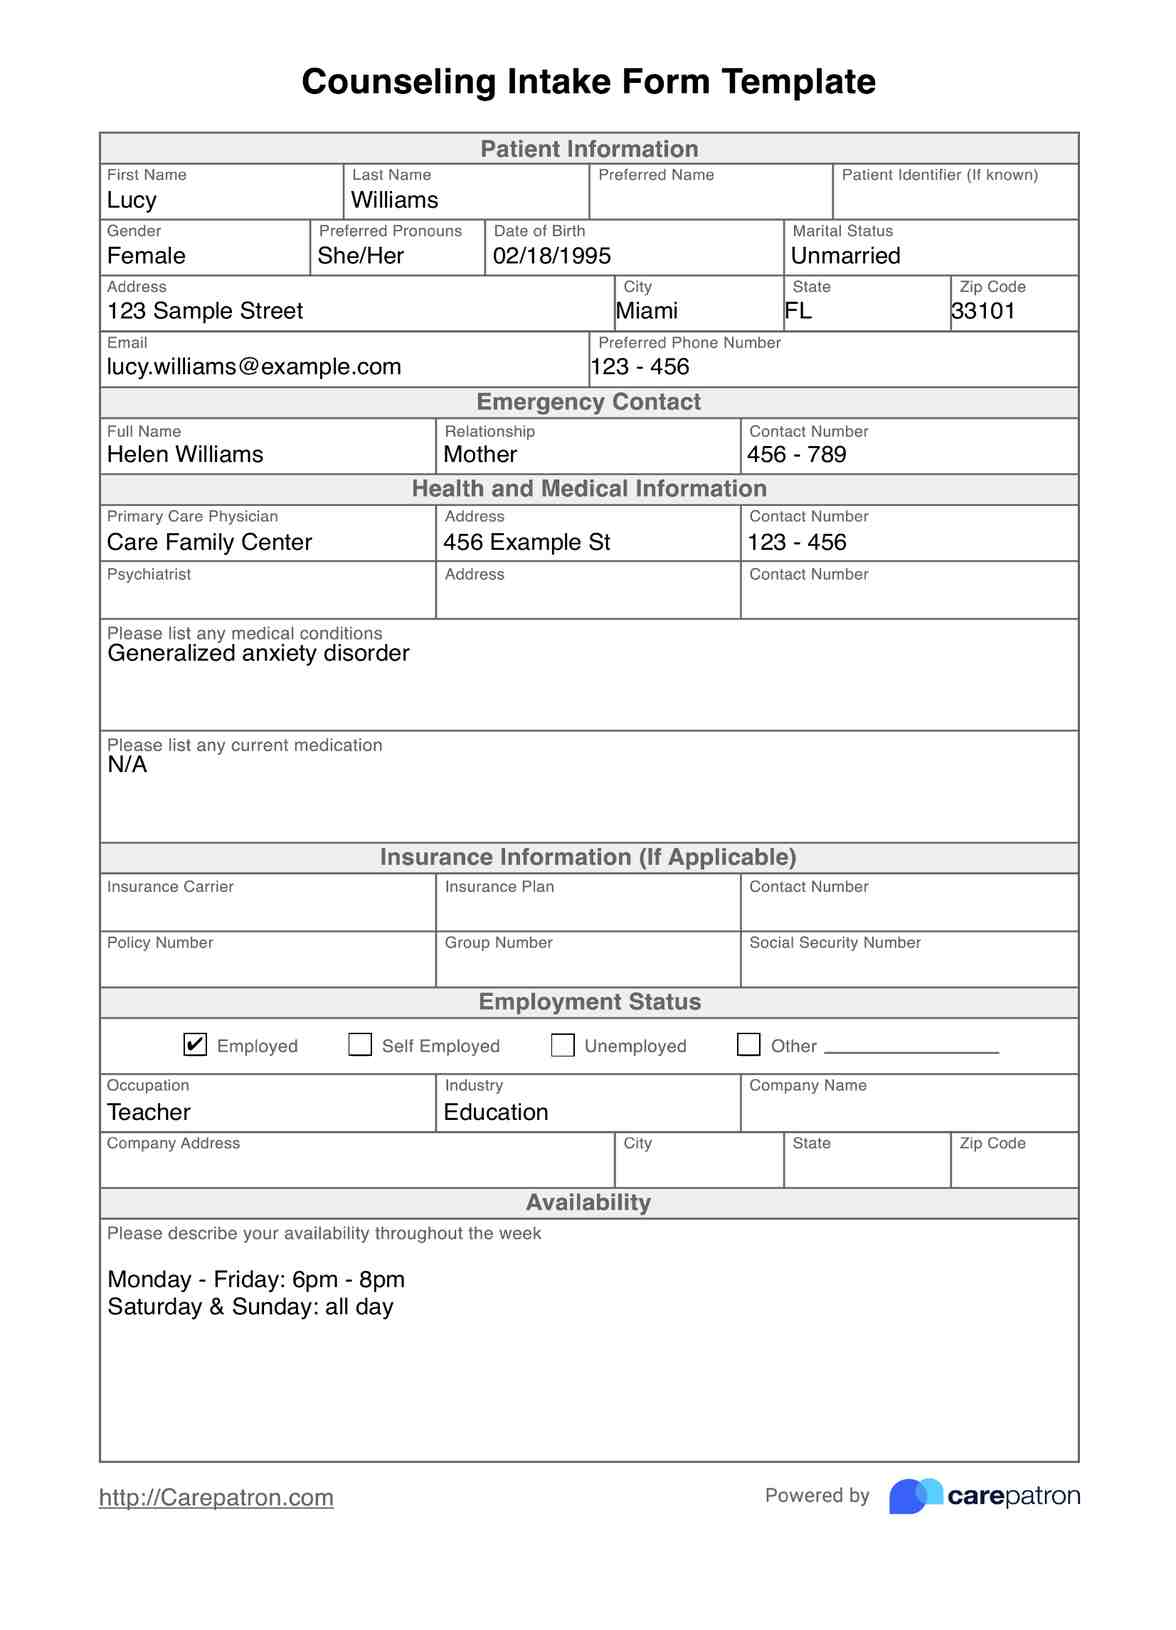 Counseling Intake Form Template PDF Example